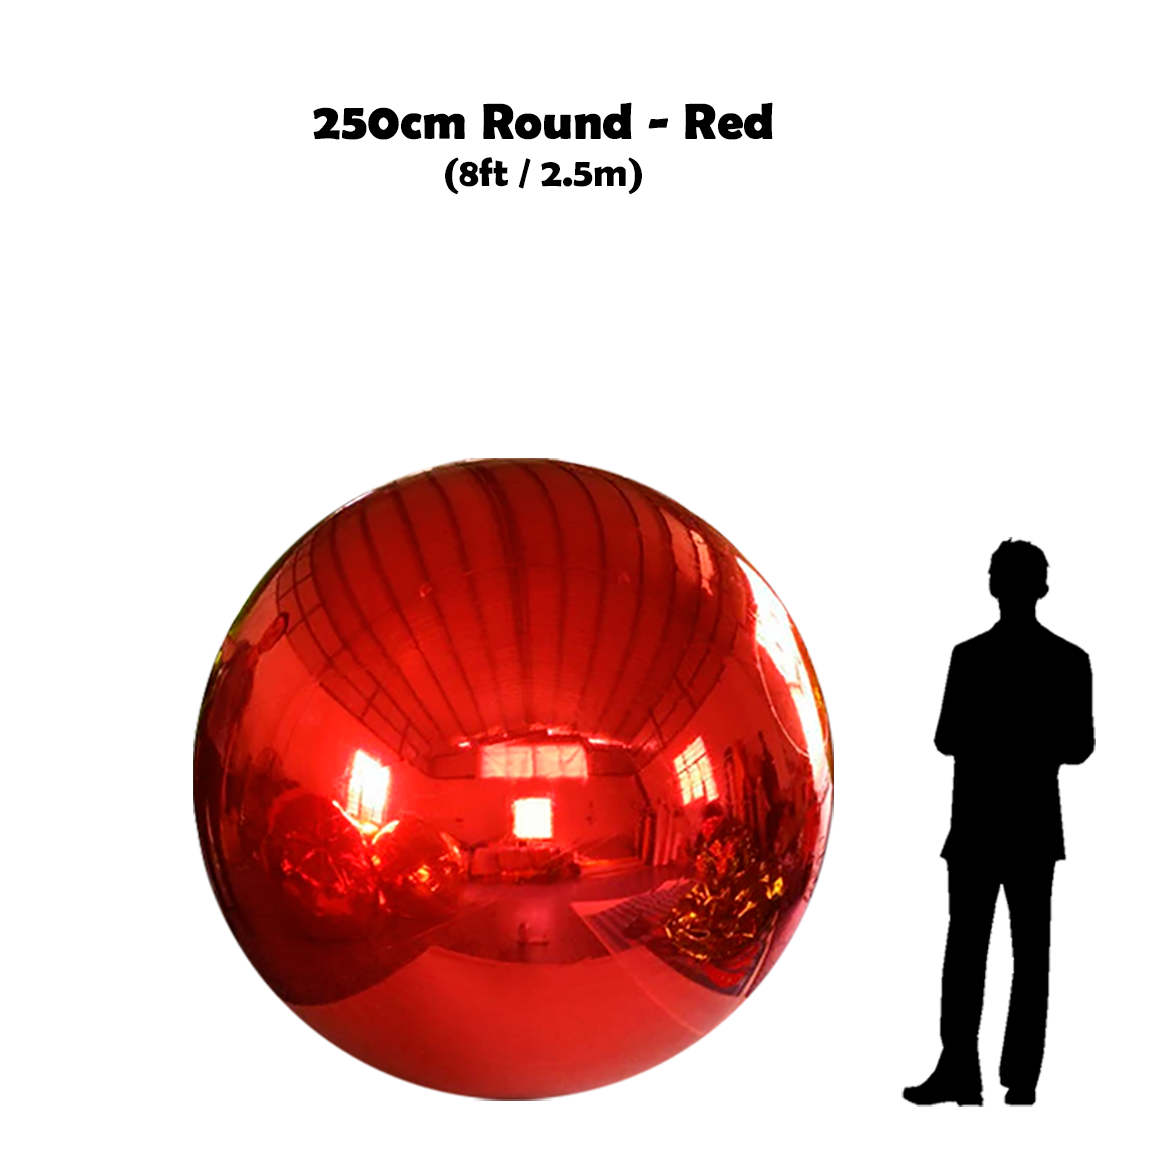 250cm Big red ball beside 5'10 guy silhouette 